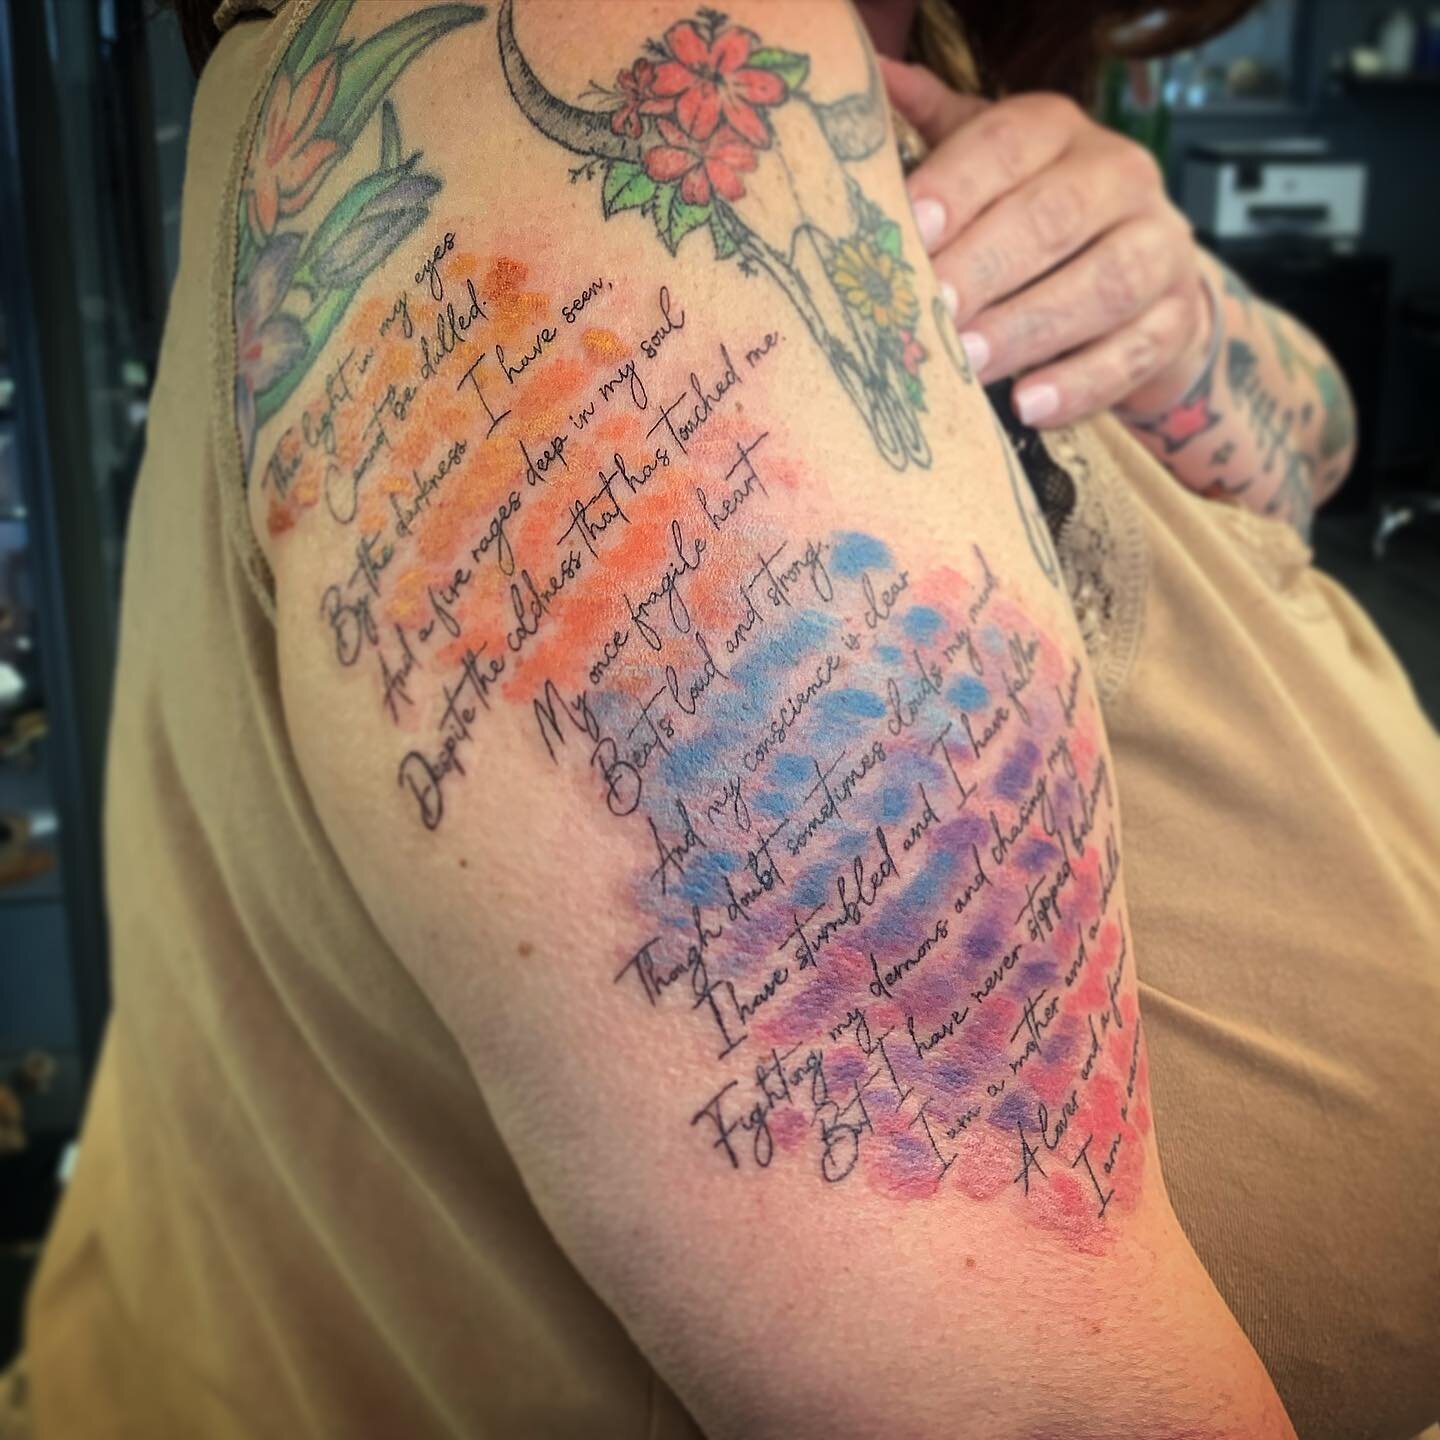 One of my favorite clients is Karrissa! We tattooed her own poem on her arm with some beautiful colors to compliment it! #mayamodification #poemtattoo #tattoos #colortattoo #poem